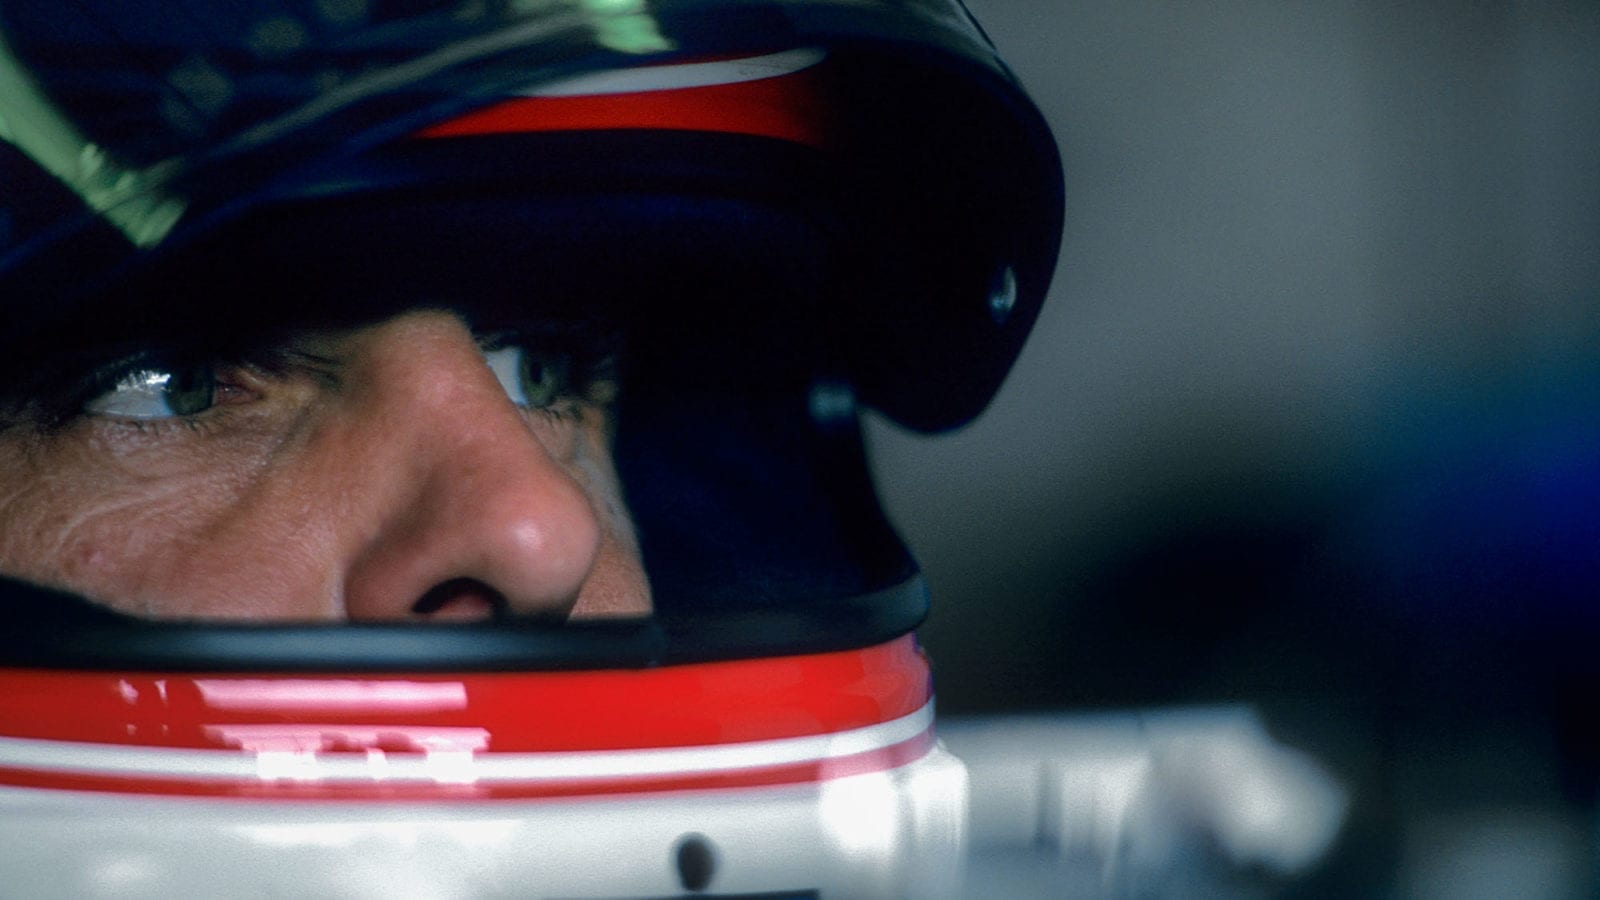 Roland Ratzenberger, Simtek-Ford S941, Grand Prix of San Marino, Autodromo Enzo e Dino Ferrari, Imola, 01 May 1994. Roland Razenberger during practice for the 1994 San Marino Grand Prix in Imola, where he was killed during qualifying. (Photo by Paul-Henri Cahier/Getty Images)